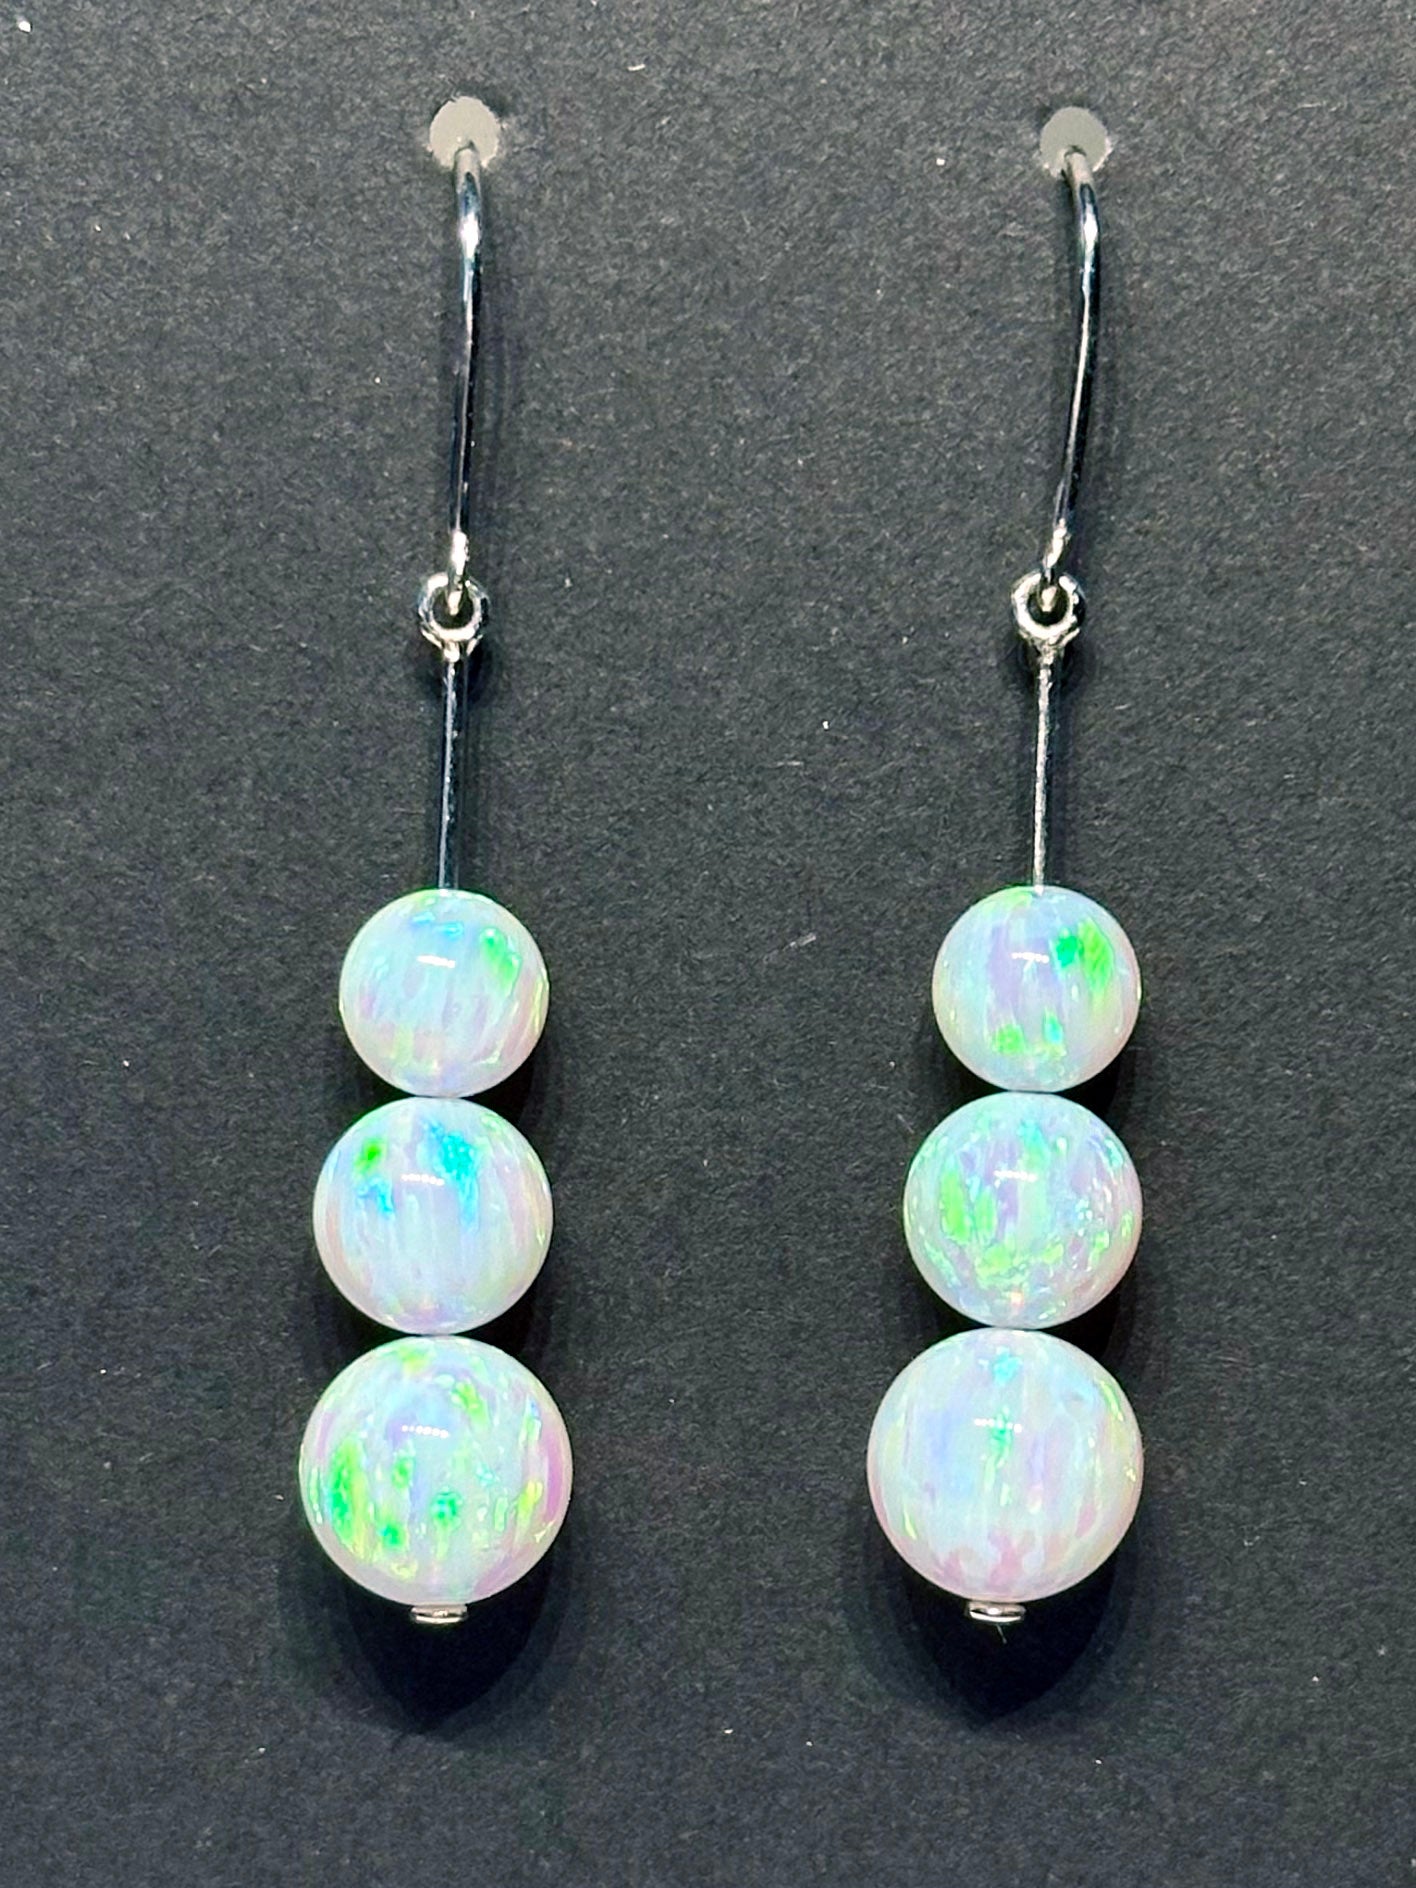 14kt White Gold Dangle Earrings set with cultured Opals